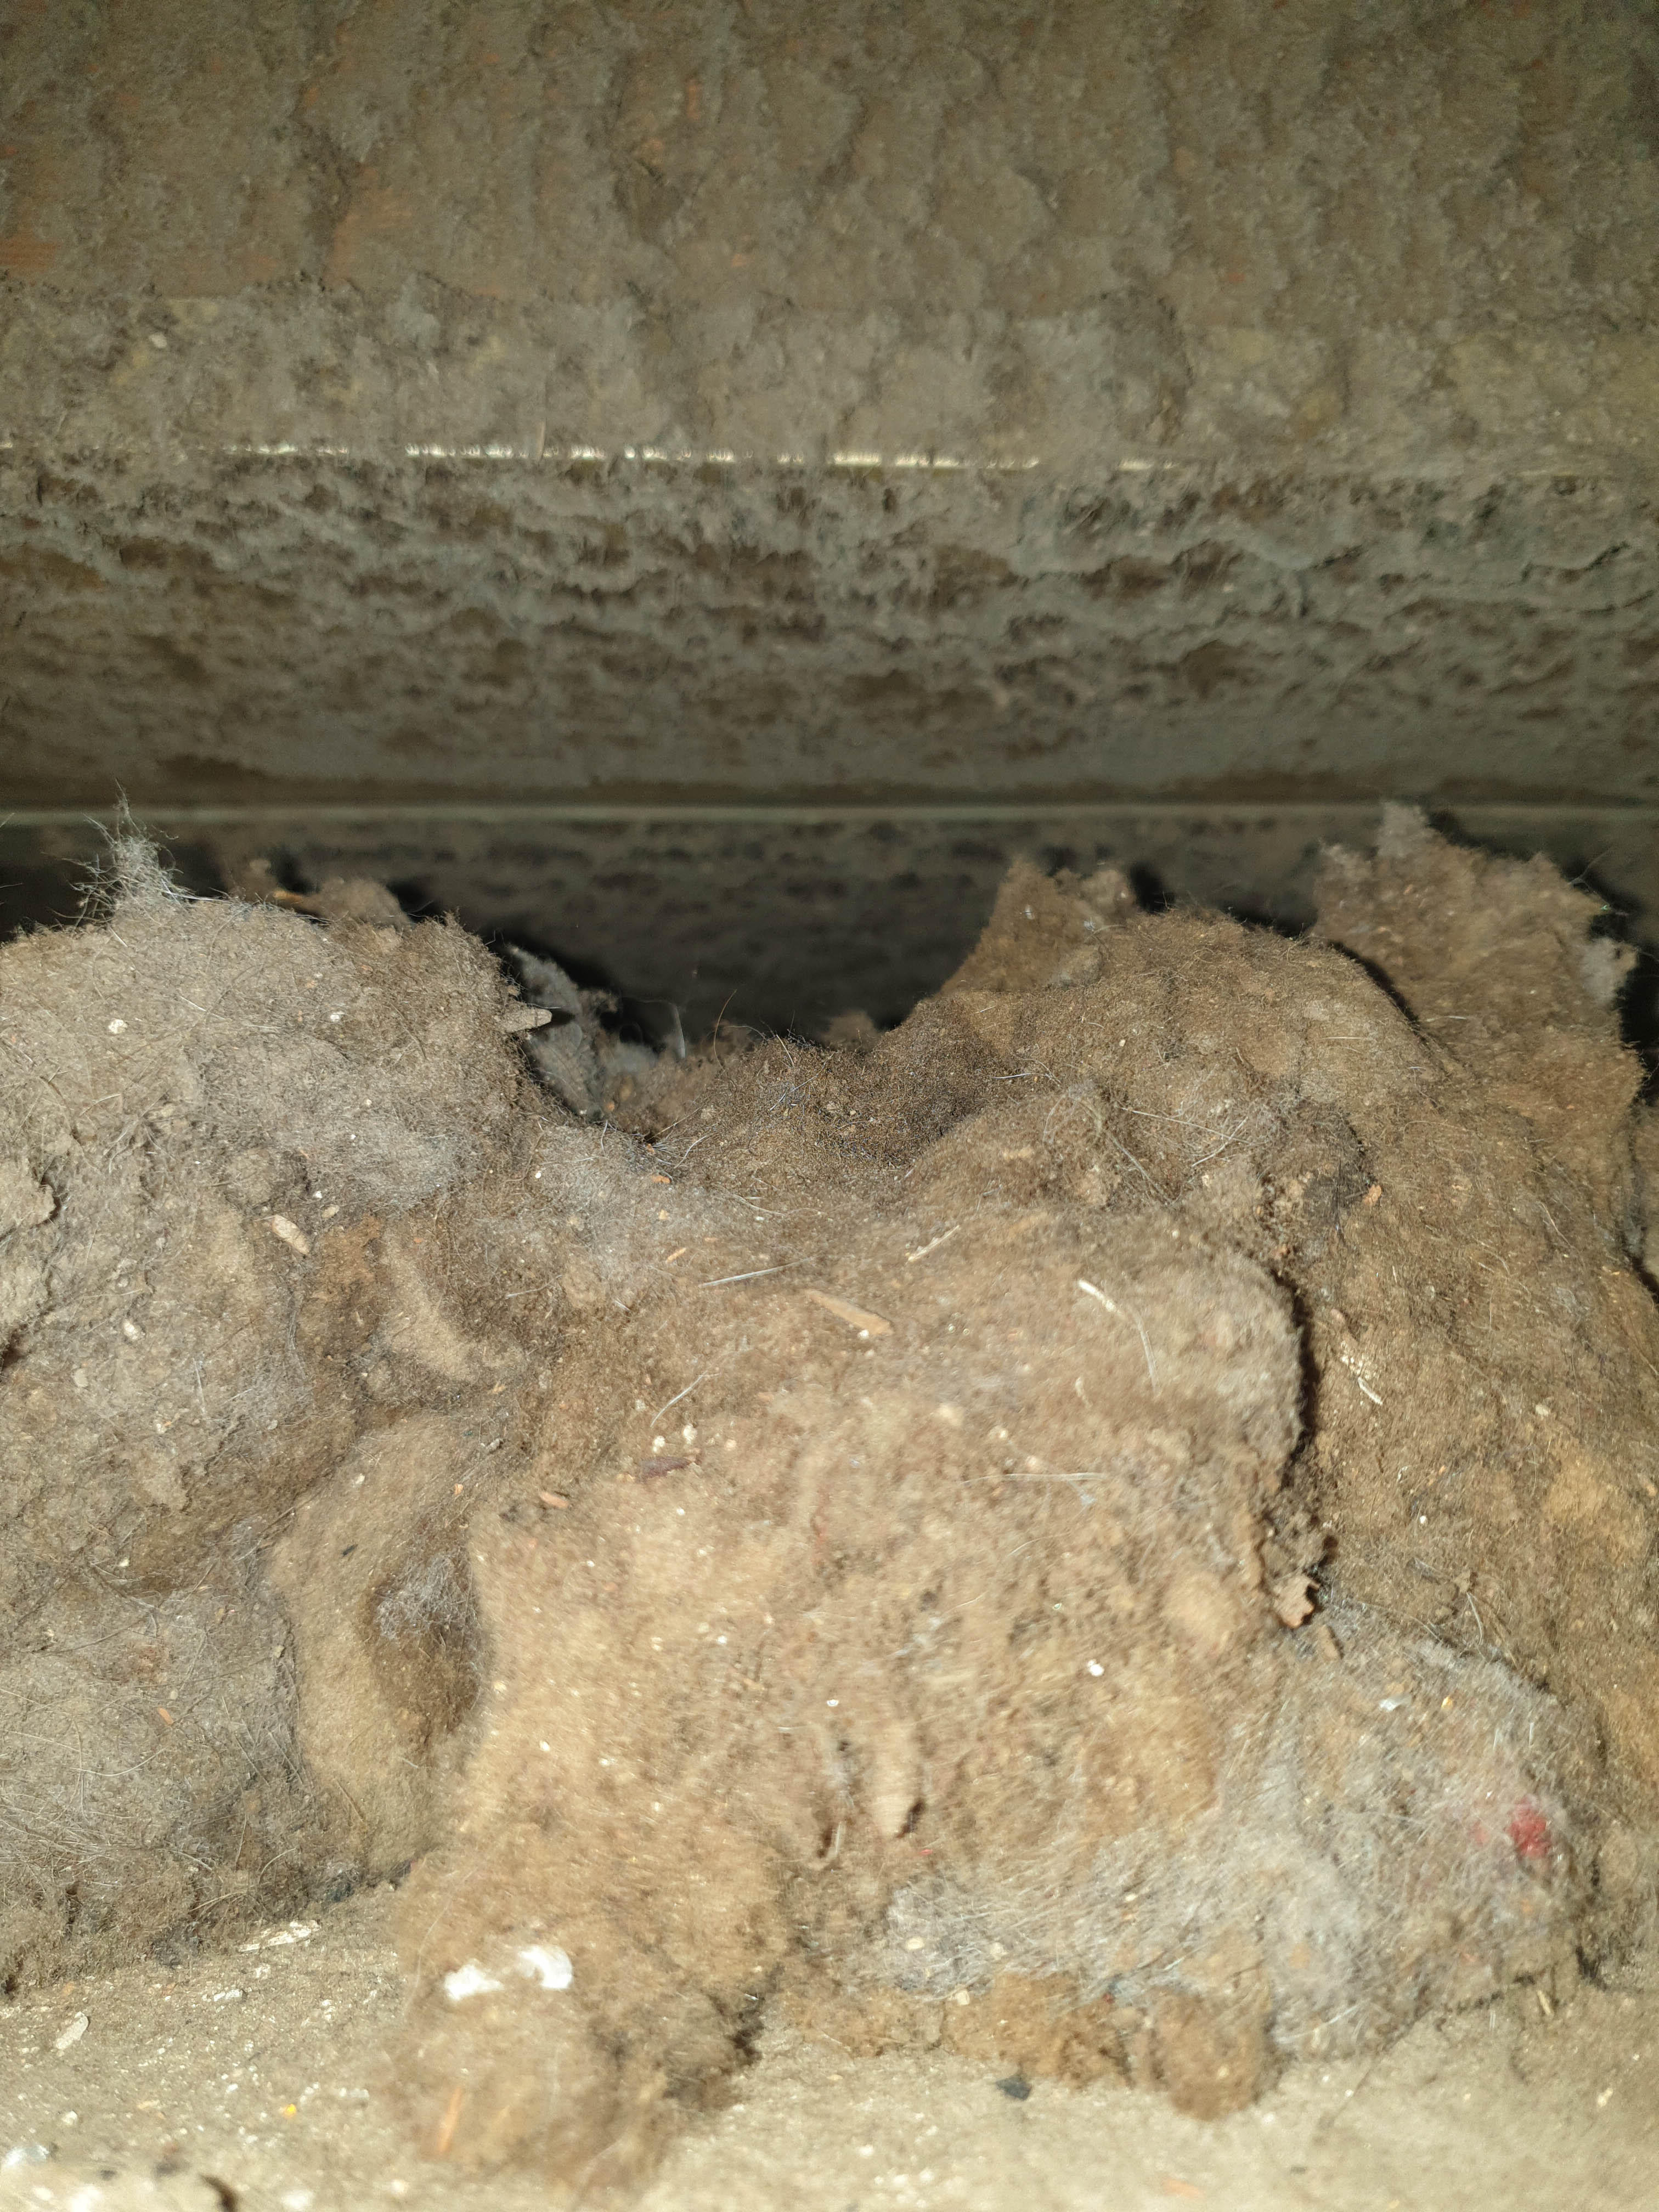 Don't let a dirty duct lower the quality of air on your home. Call SERVPRO